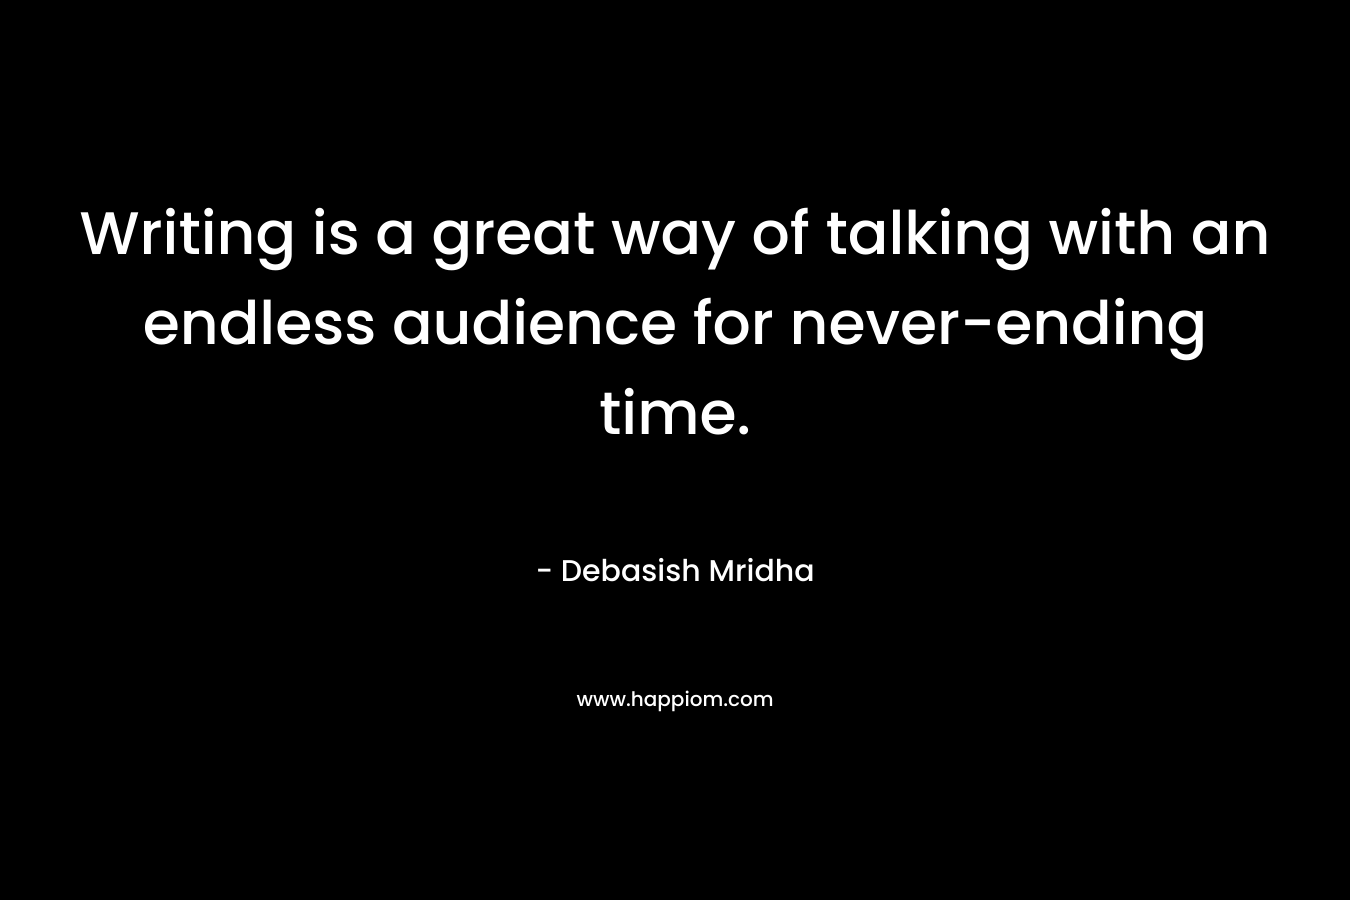 Writing is a great way of talking with an endless audience for never-ending time. – Debasish Mridha